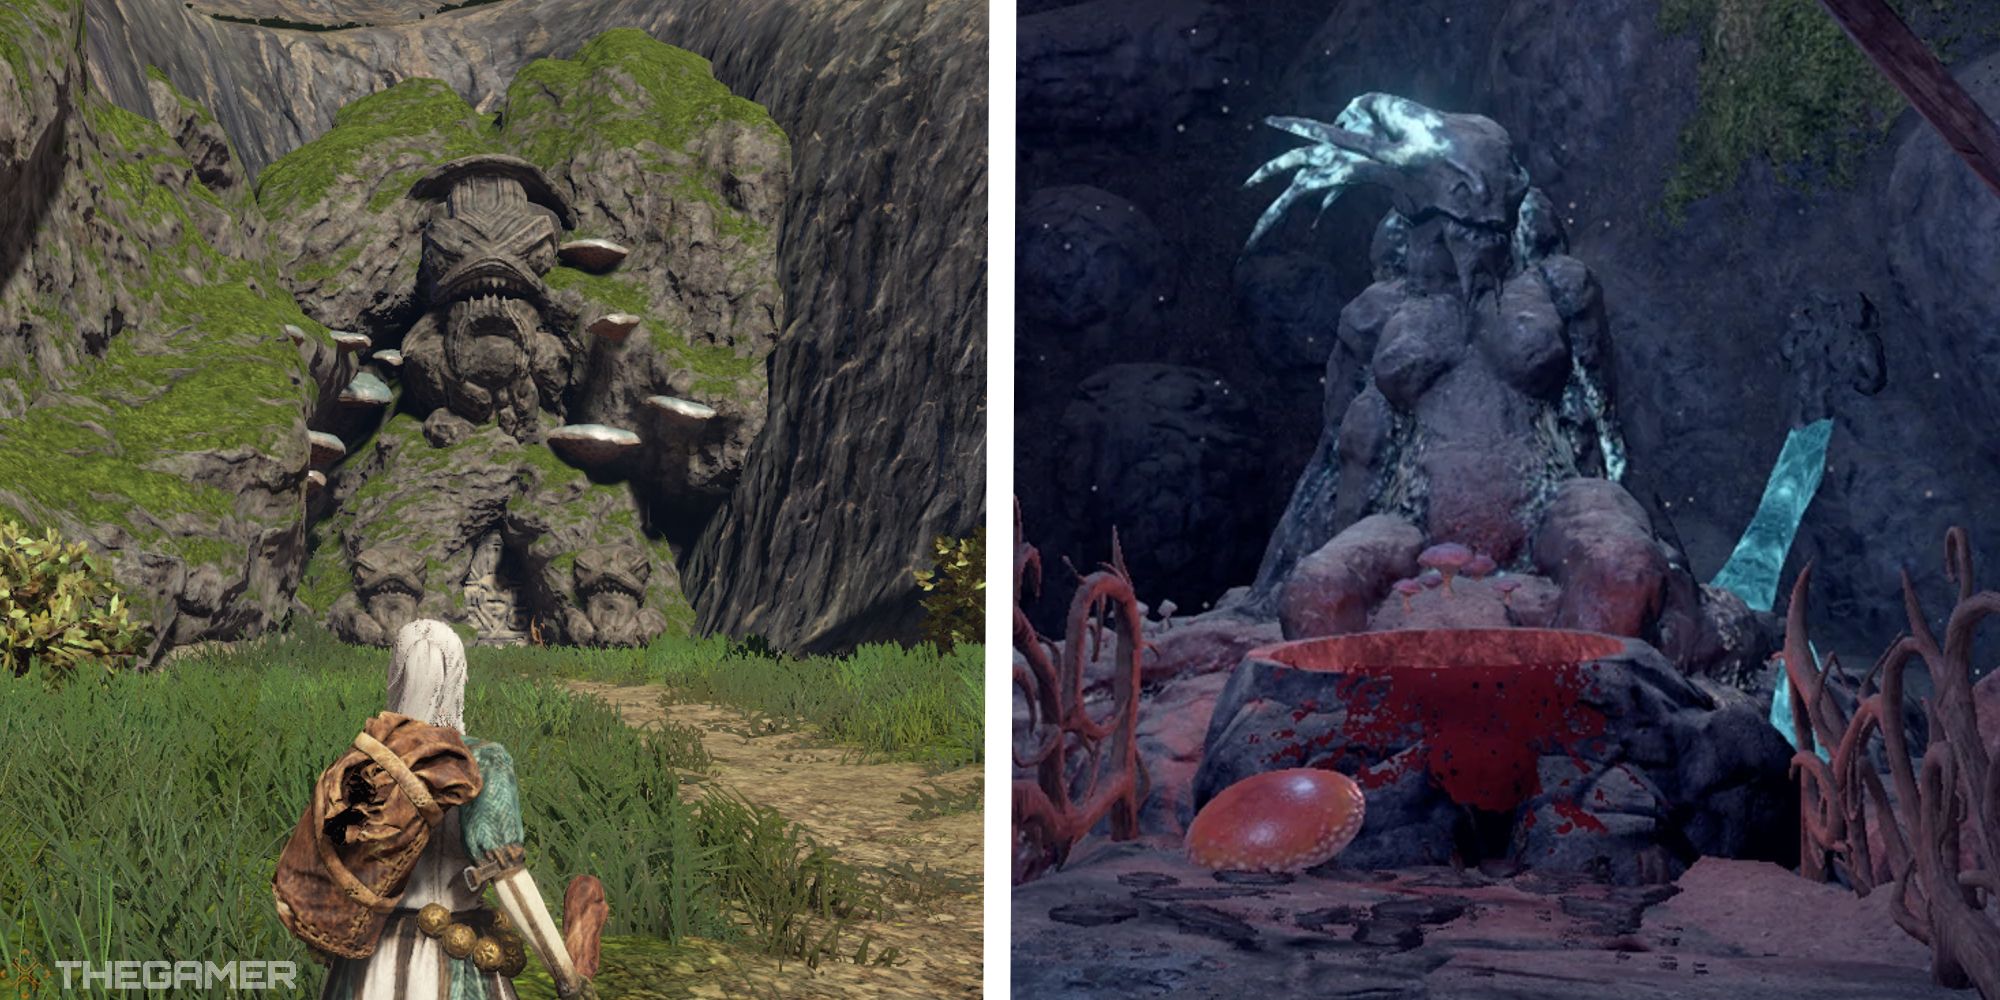 image of player looking at blister burrow next to image of mushroom shield location